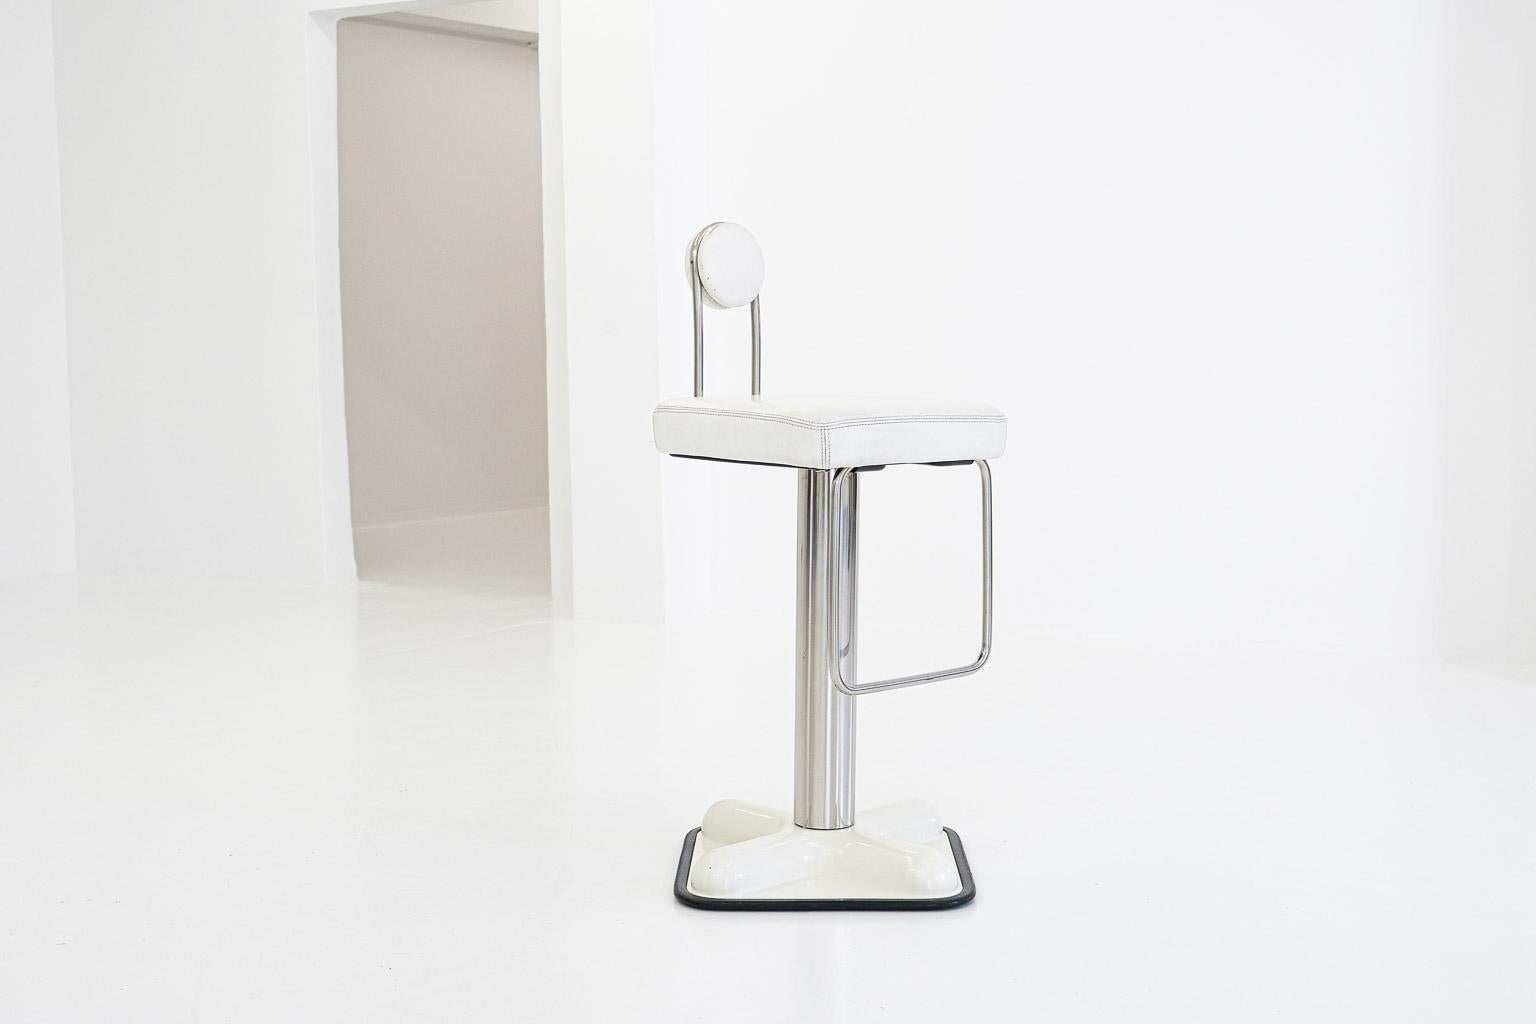 The “birillo” bar stool (italian for “bowling pin”), designed in 1970 for italian company zanotta is one of his last designs: colombo died in 1971 at only 41 years of age. futuristic already five decades ago the unique look would befit the luxurious